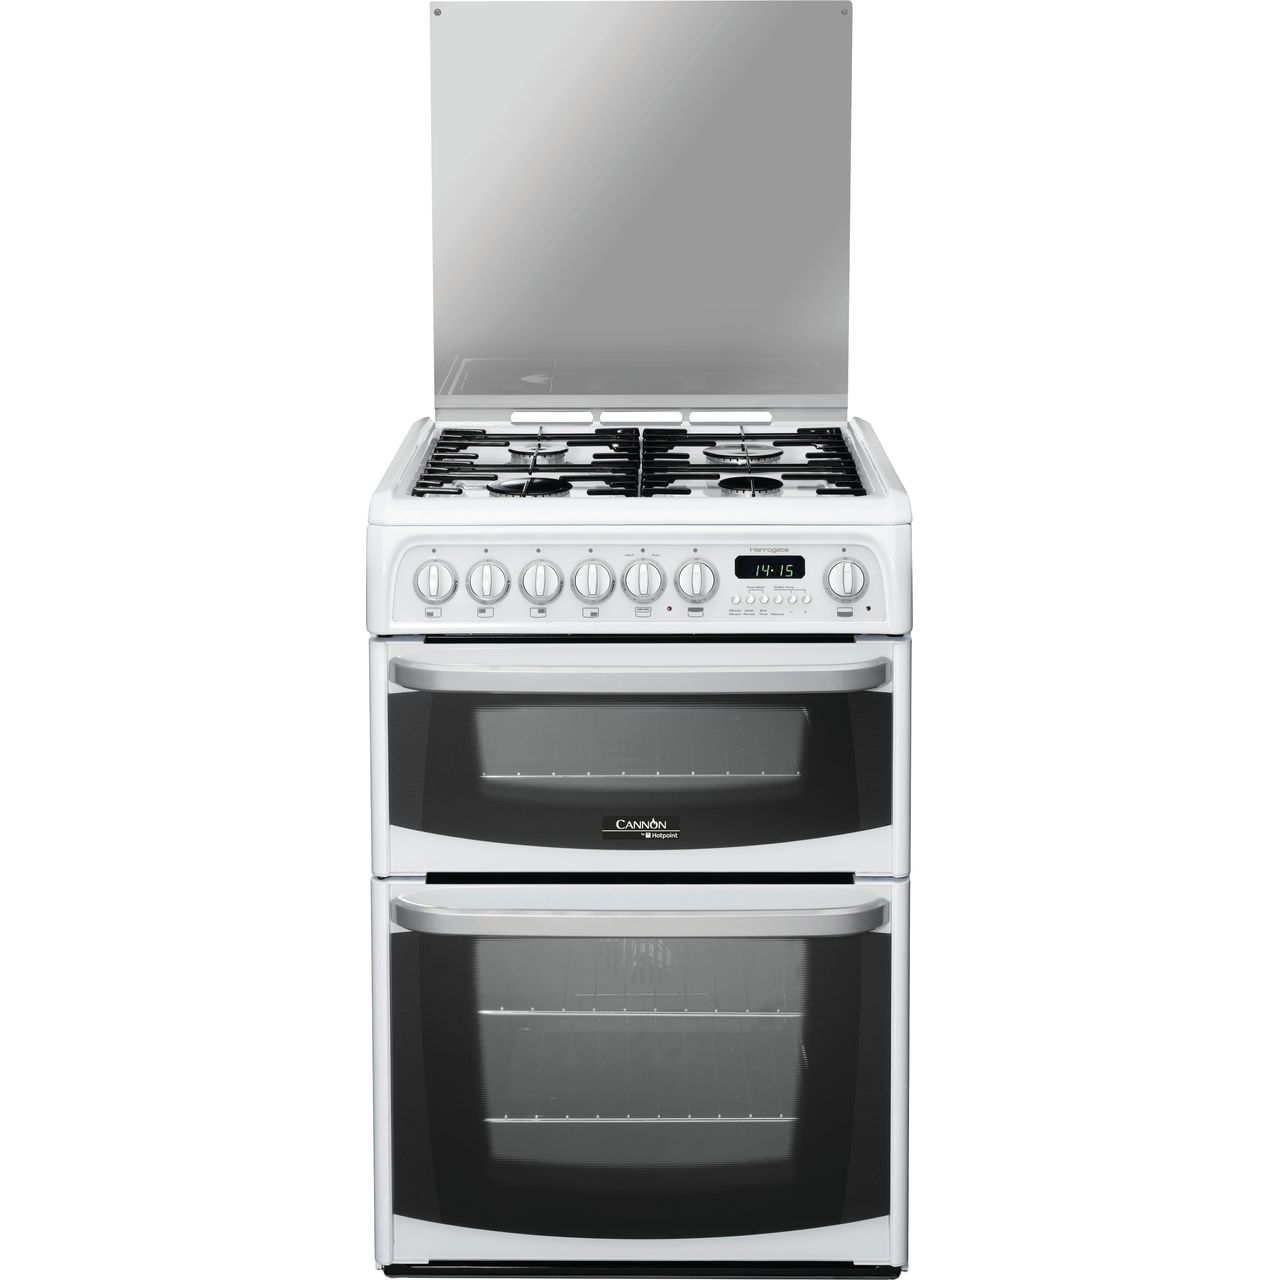 Cannon by Hotpoint Harrogate CH60DHWFS Dual Fuel Cooker Review